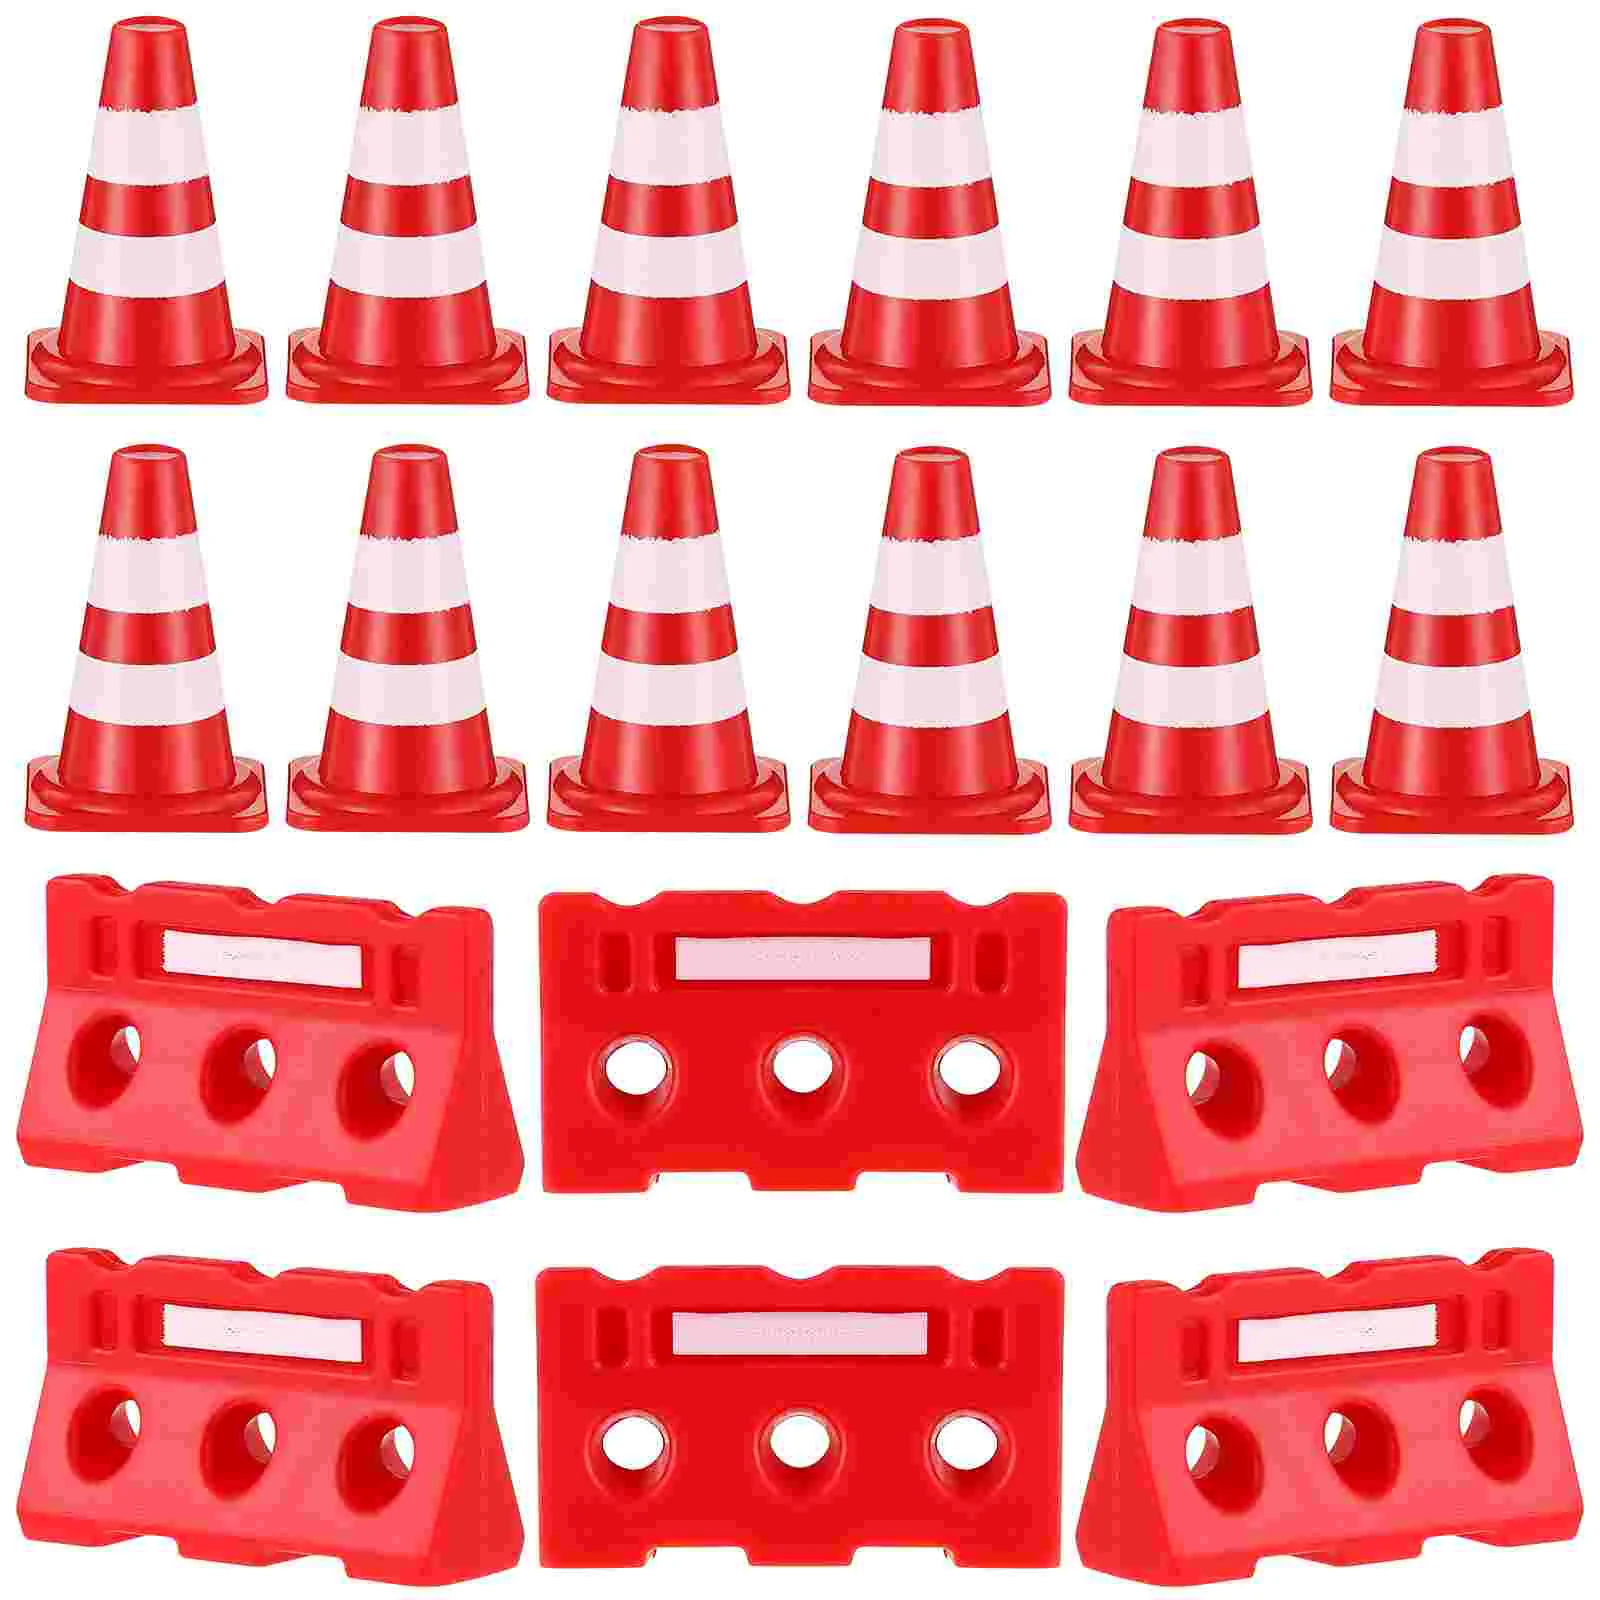 24 Pcs Miniature Traffic Cones and Fences Models Road Construction Cones Kids Traffic Signs Toys Children Educational Learning